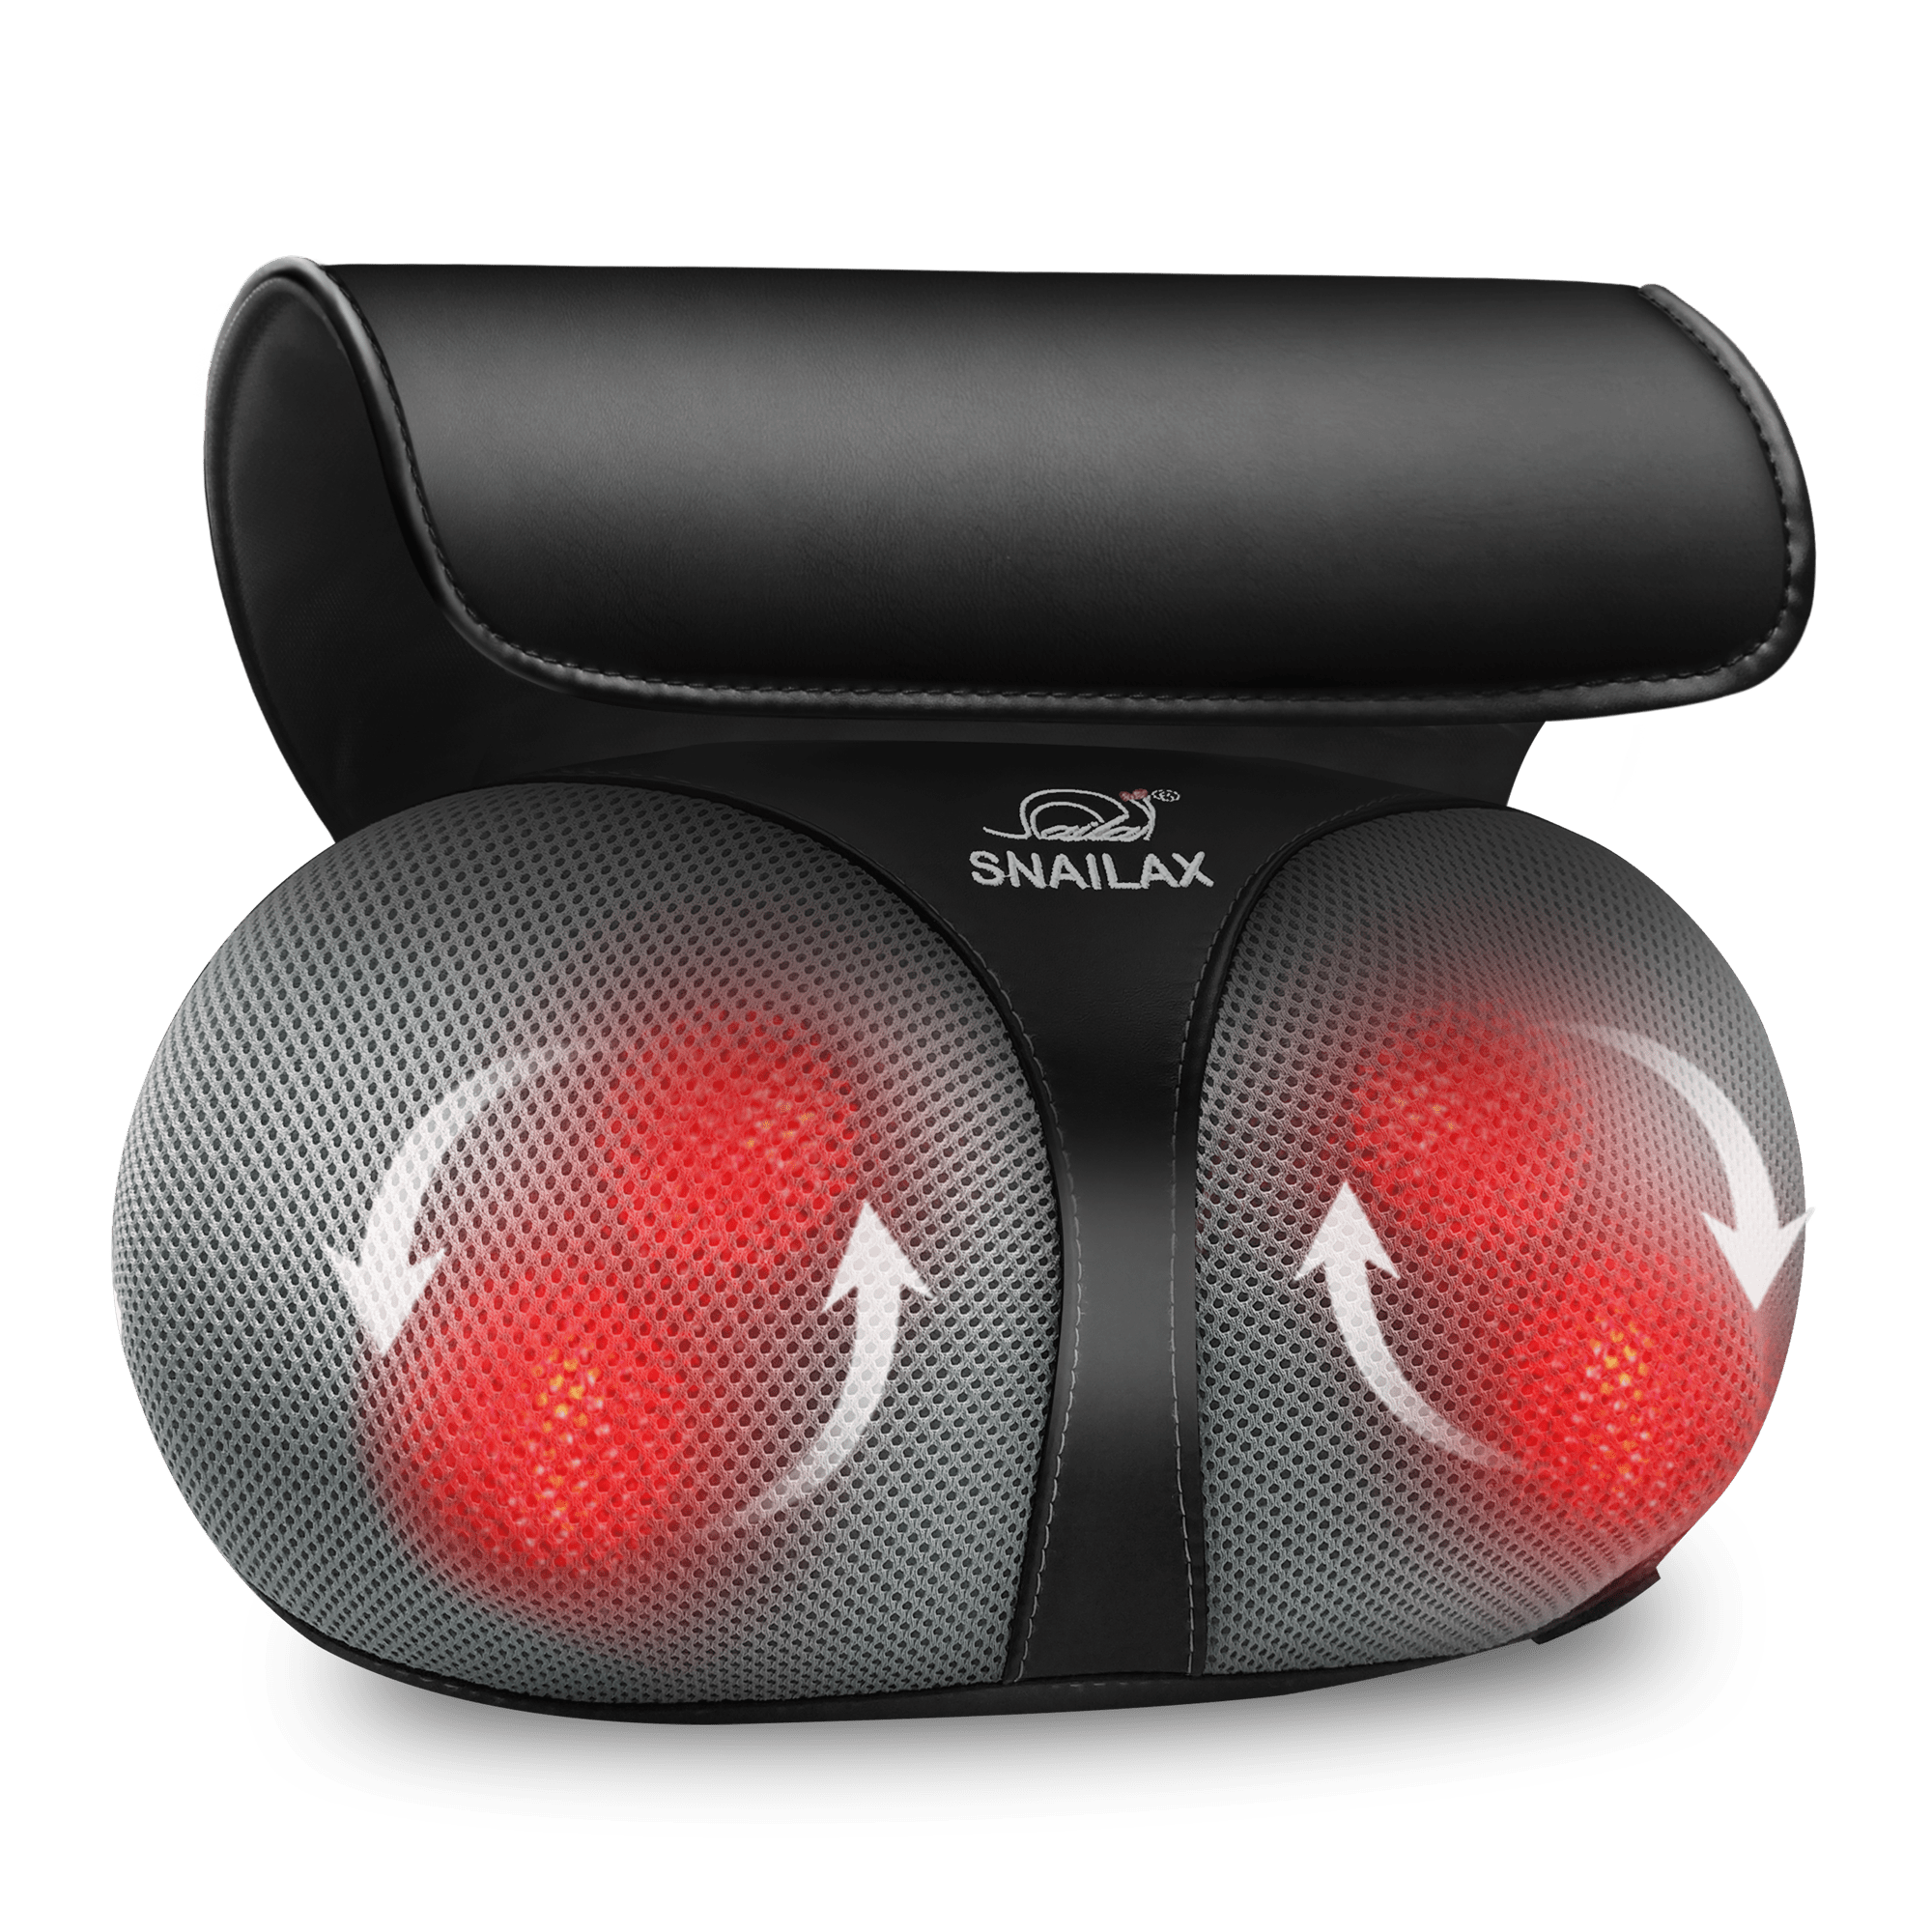 Snailax Cordless Neck Massager with Heat, Shiatsu Back Massage Pillow,Electric Portable Massager for Neck Shoulder,Back,Leg Muscle Pain Relief,Gifts